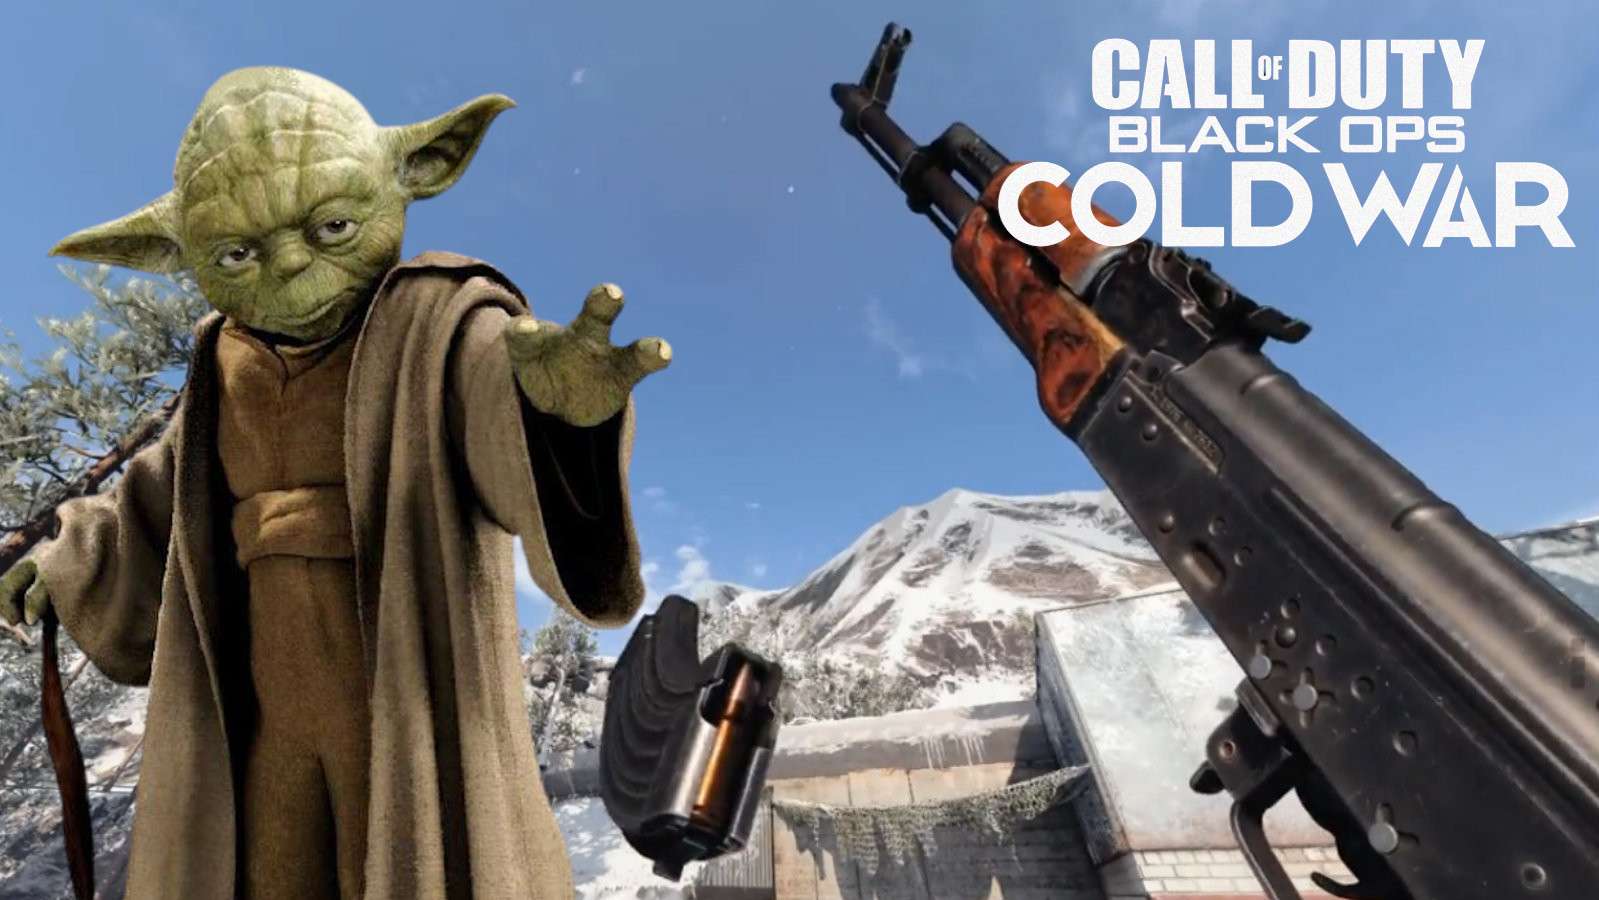 Yoda uses the force to reload gun in Black Ops Cold War